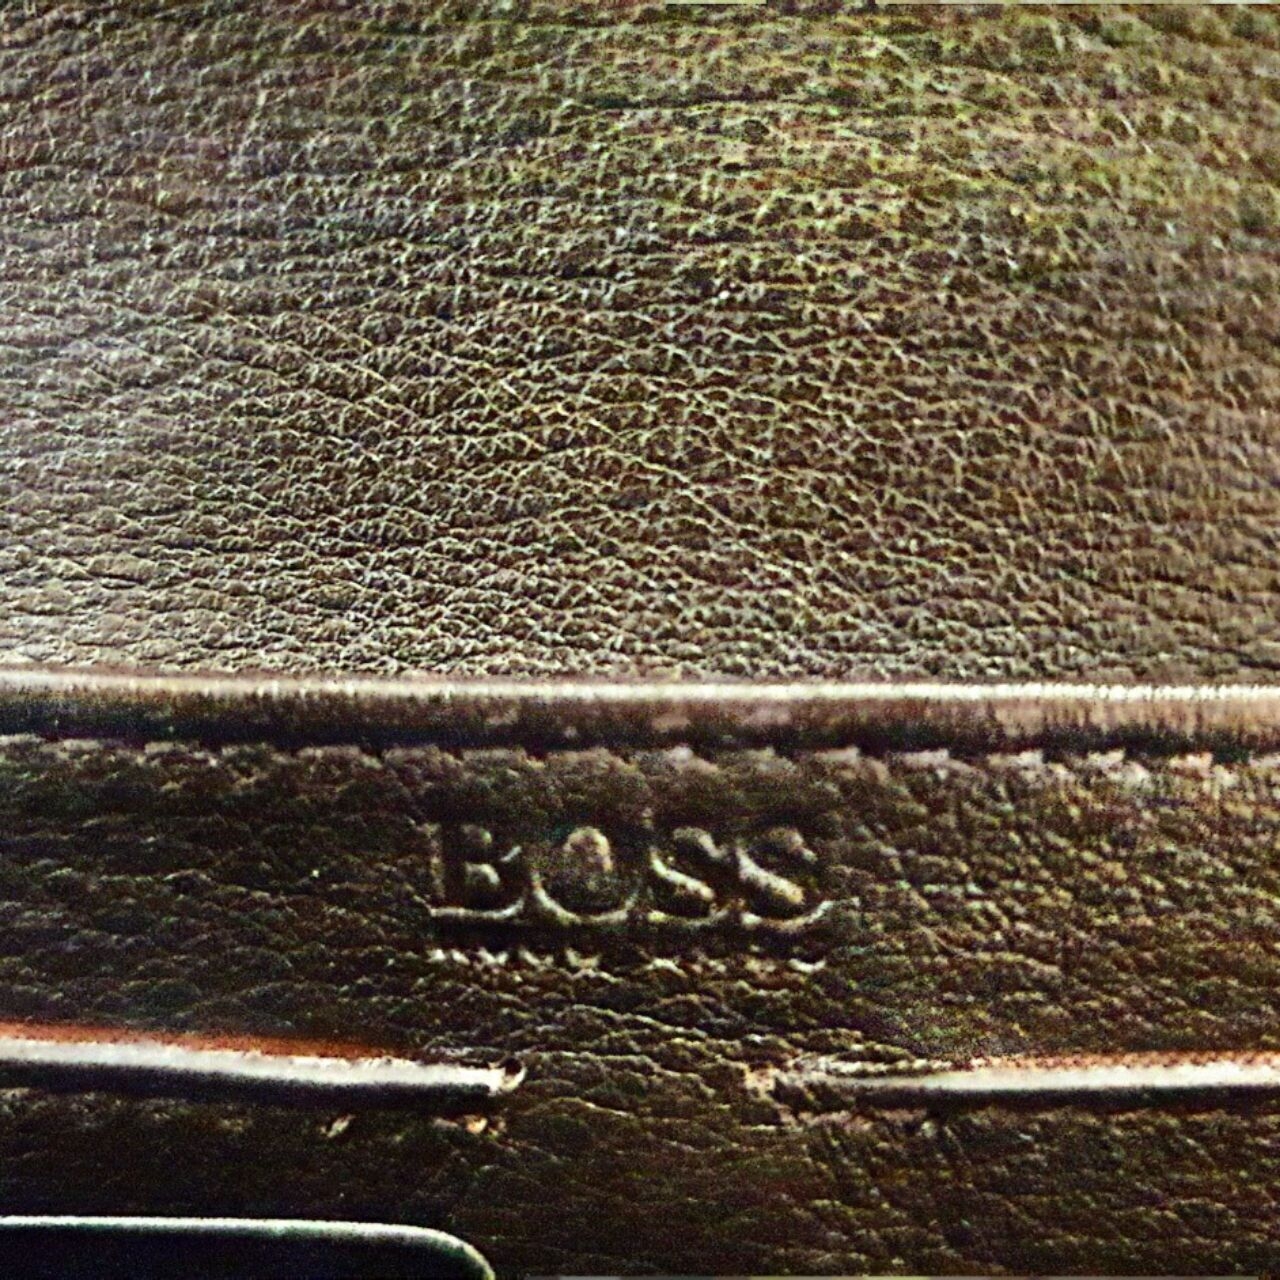 Boss By Hugo Boss Yellow and Black Clutch With Chain